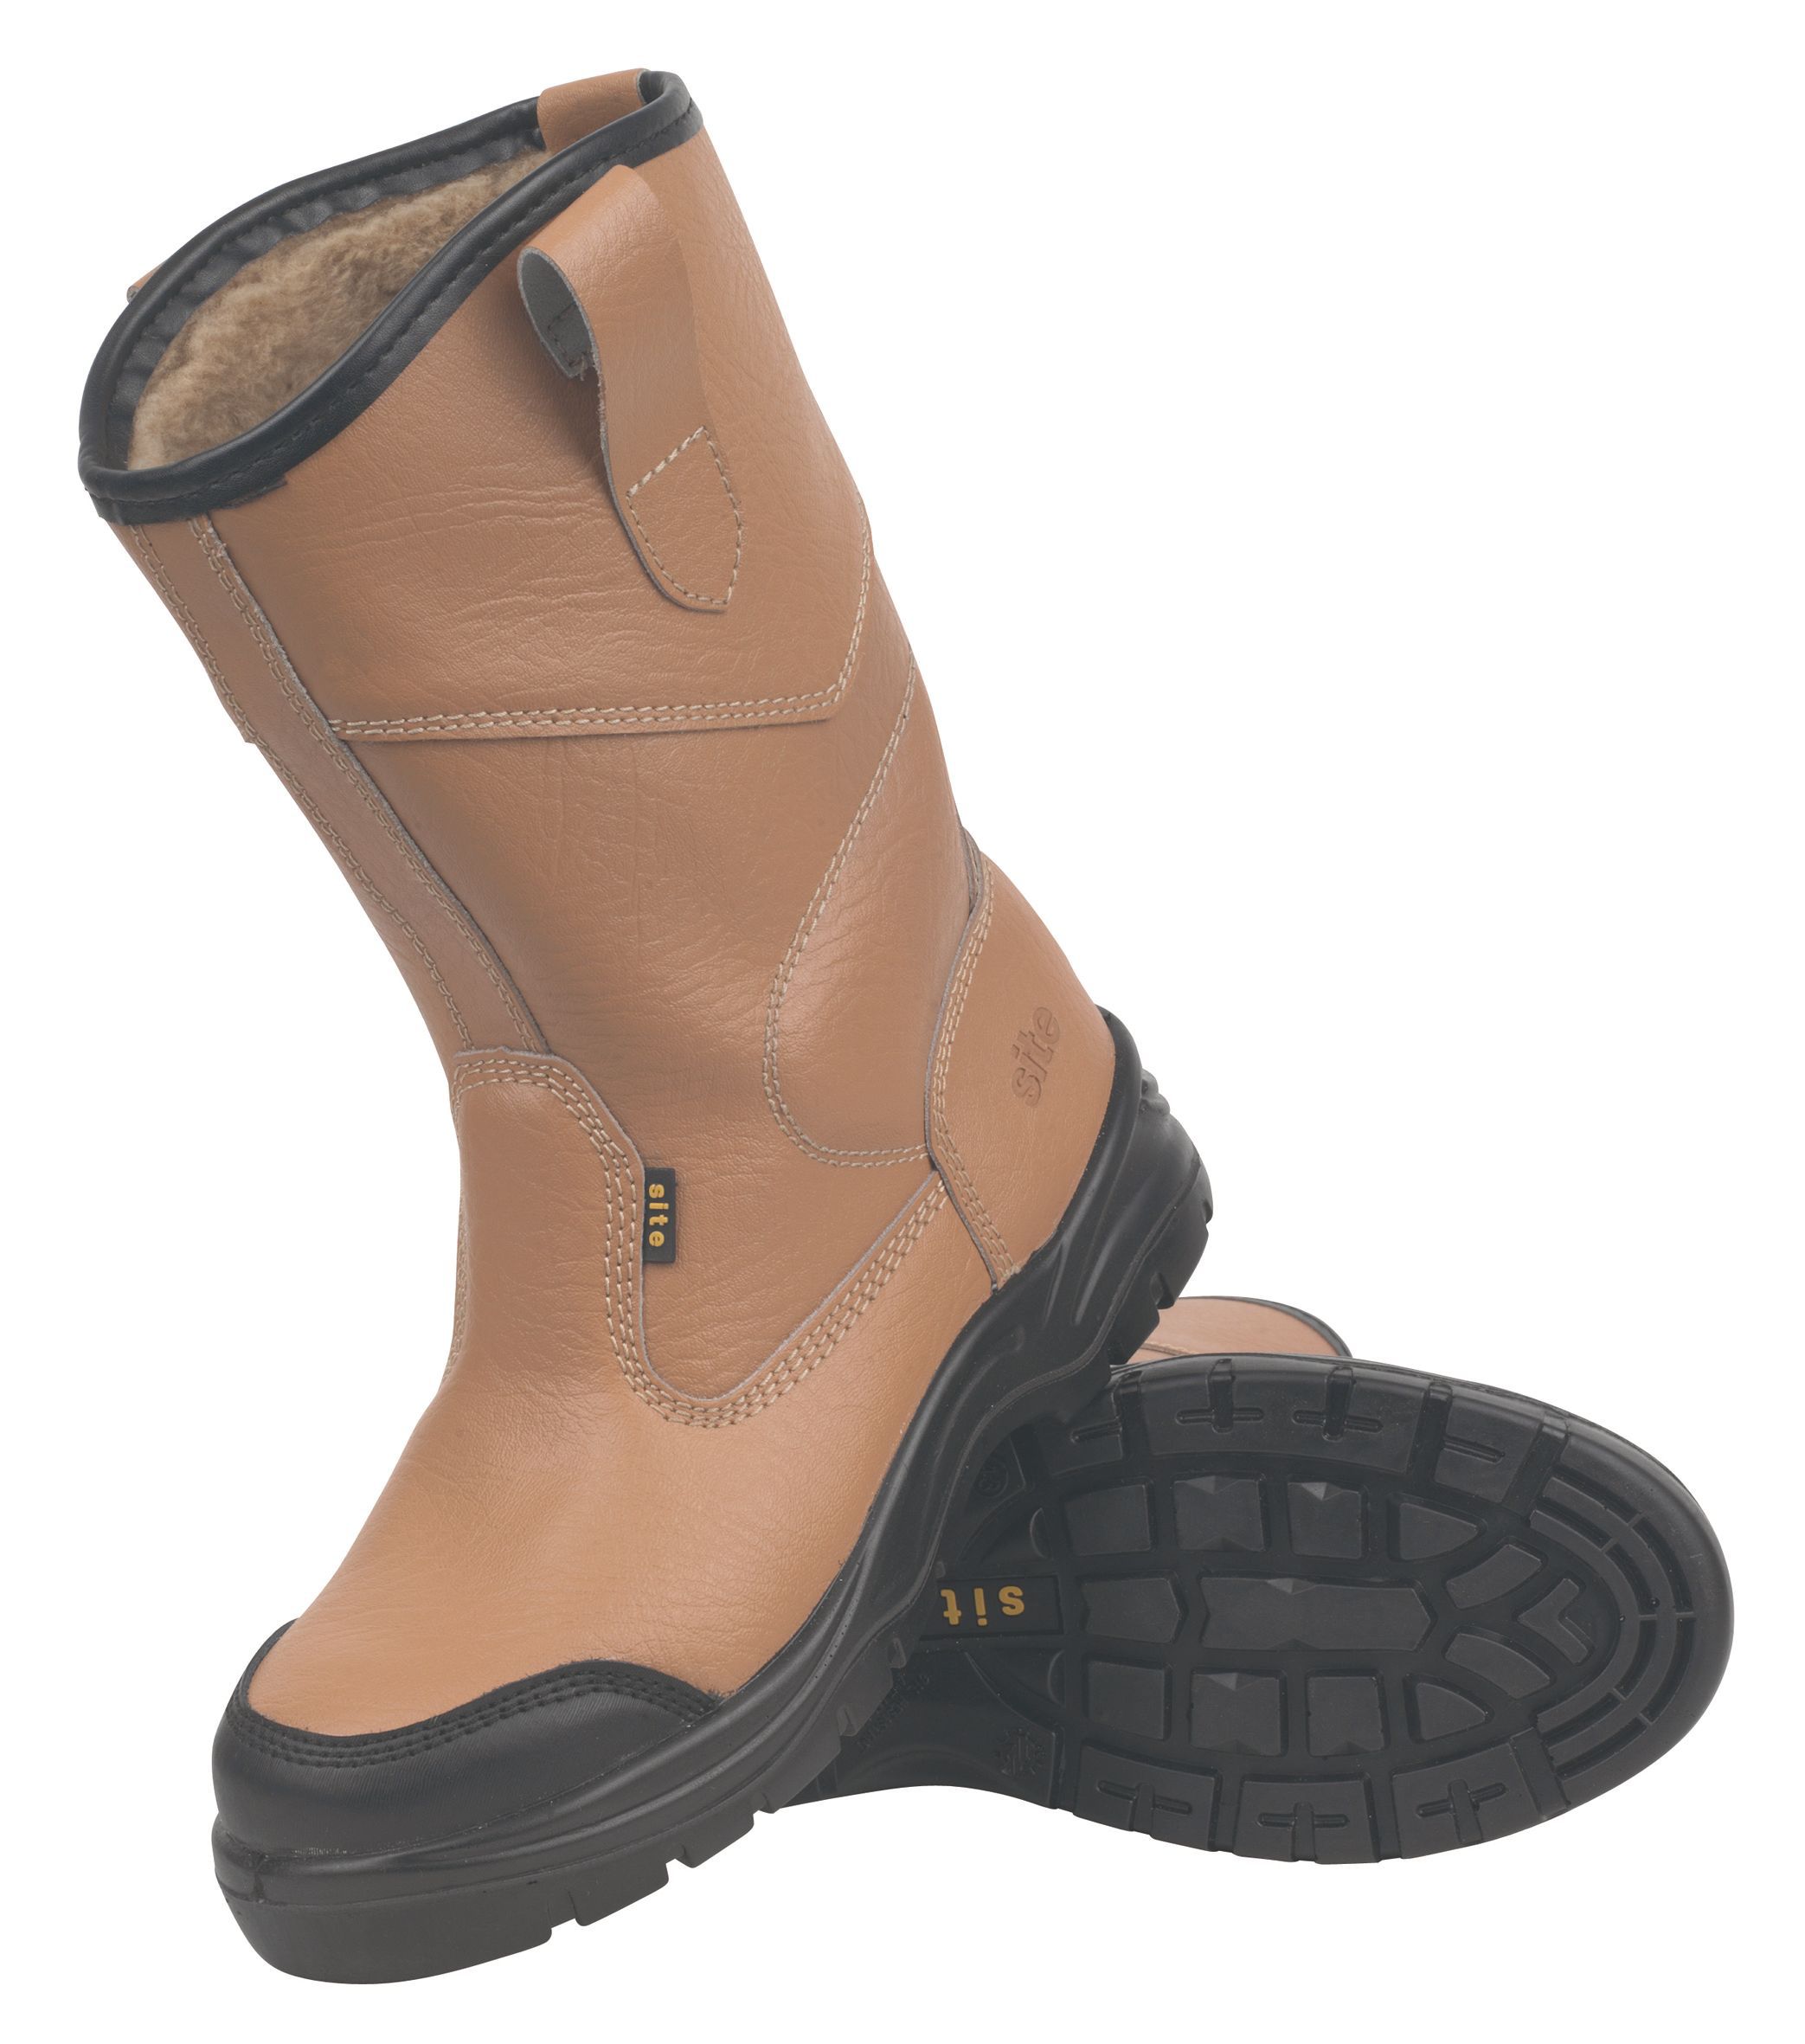 b and q rigger boots